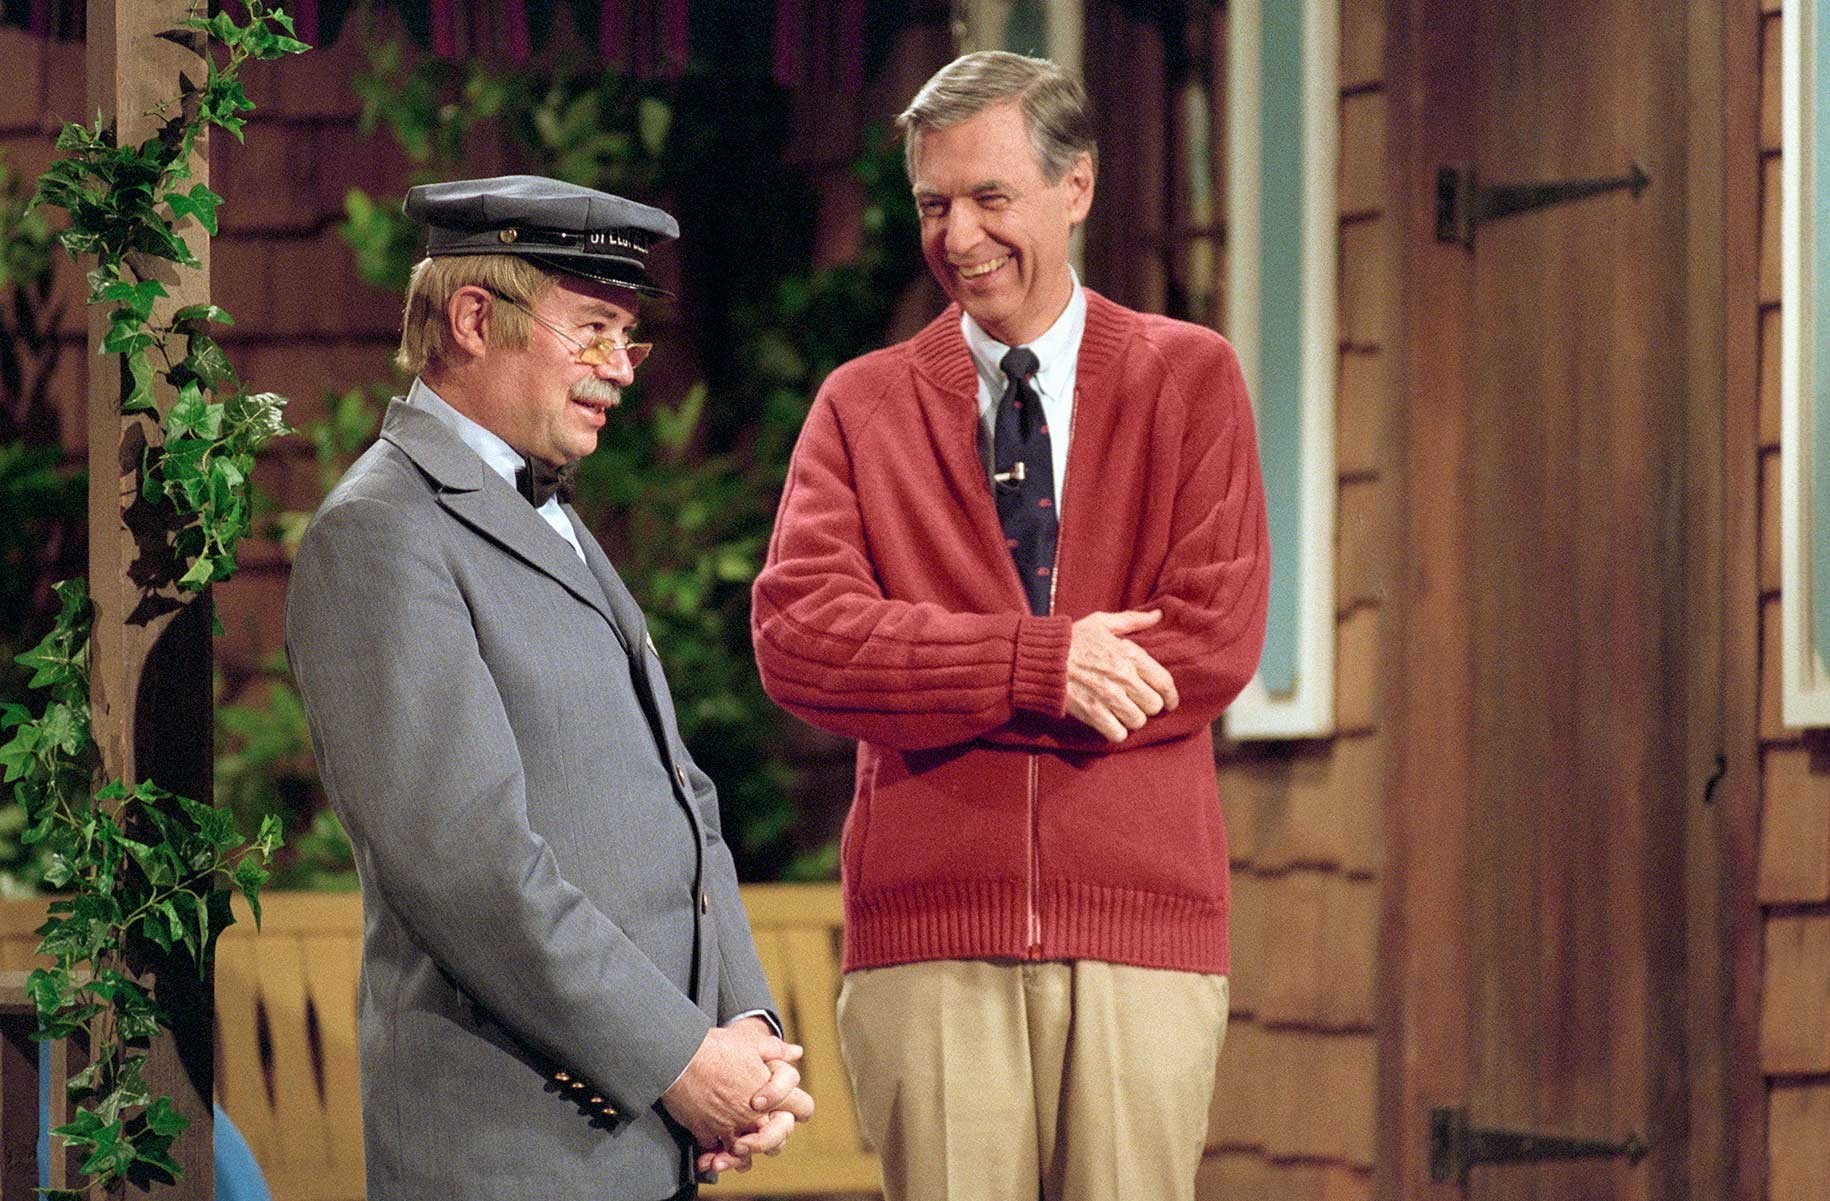 Fred Rogers (right), appearing with David Newell in the children’s TV show Mr. Rogers’ Neighborhood, is the subject of the documentary Won’t You Be My Neighbor? - COURTESY OF FOCUS FEATURES